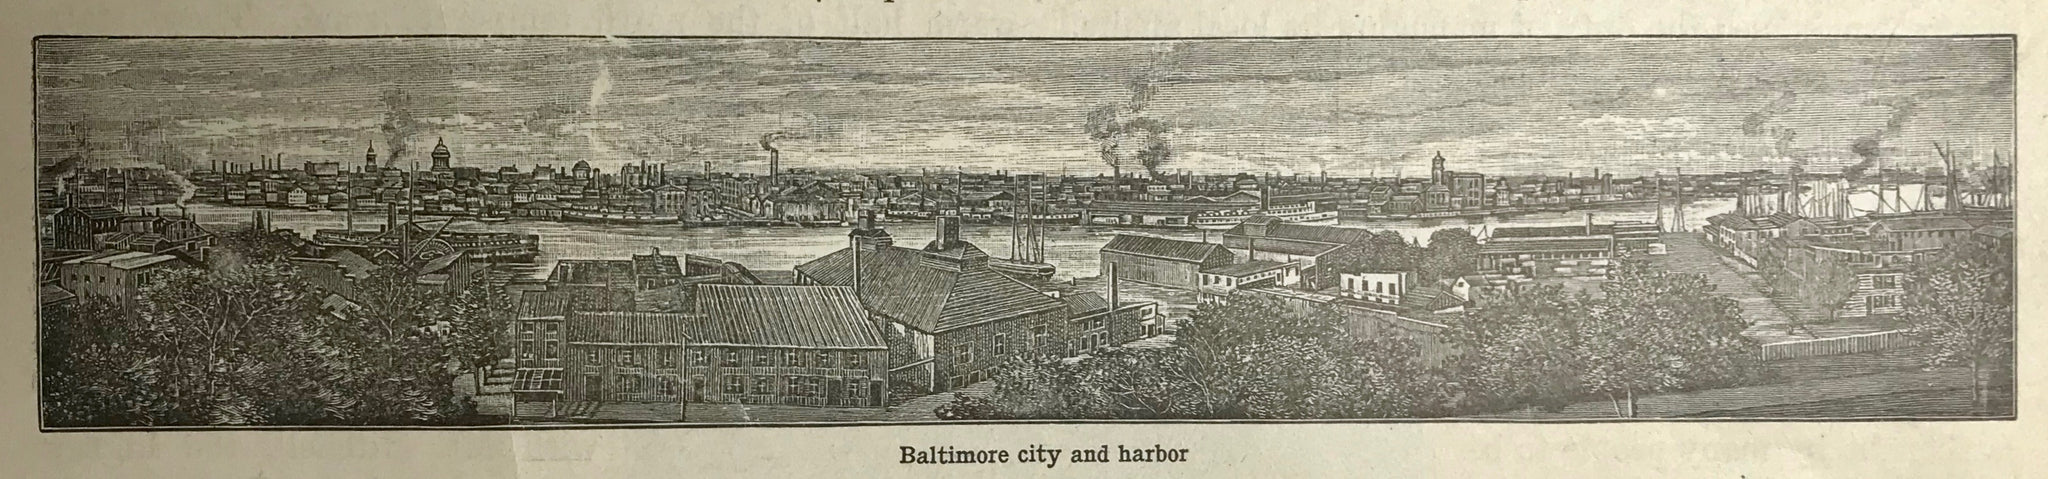 "Baltimore city and harbor"  Wood engraving ca 1885. Reverse side is printed.